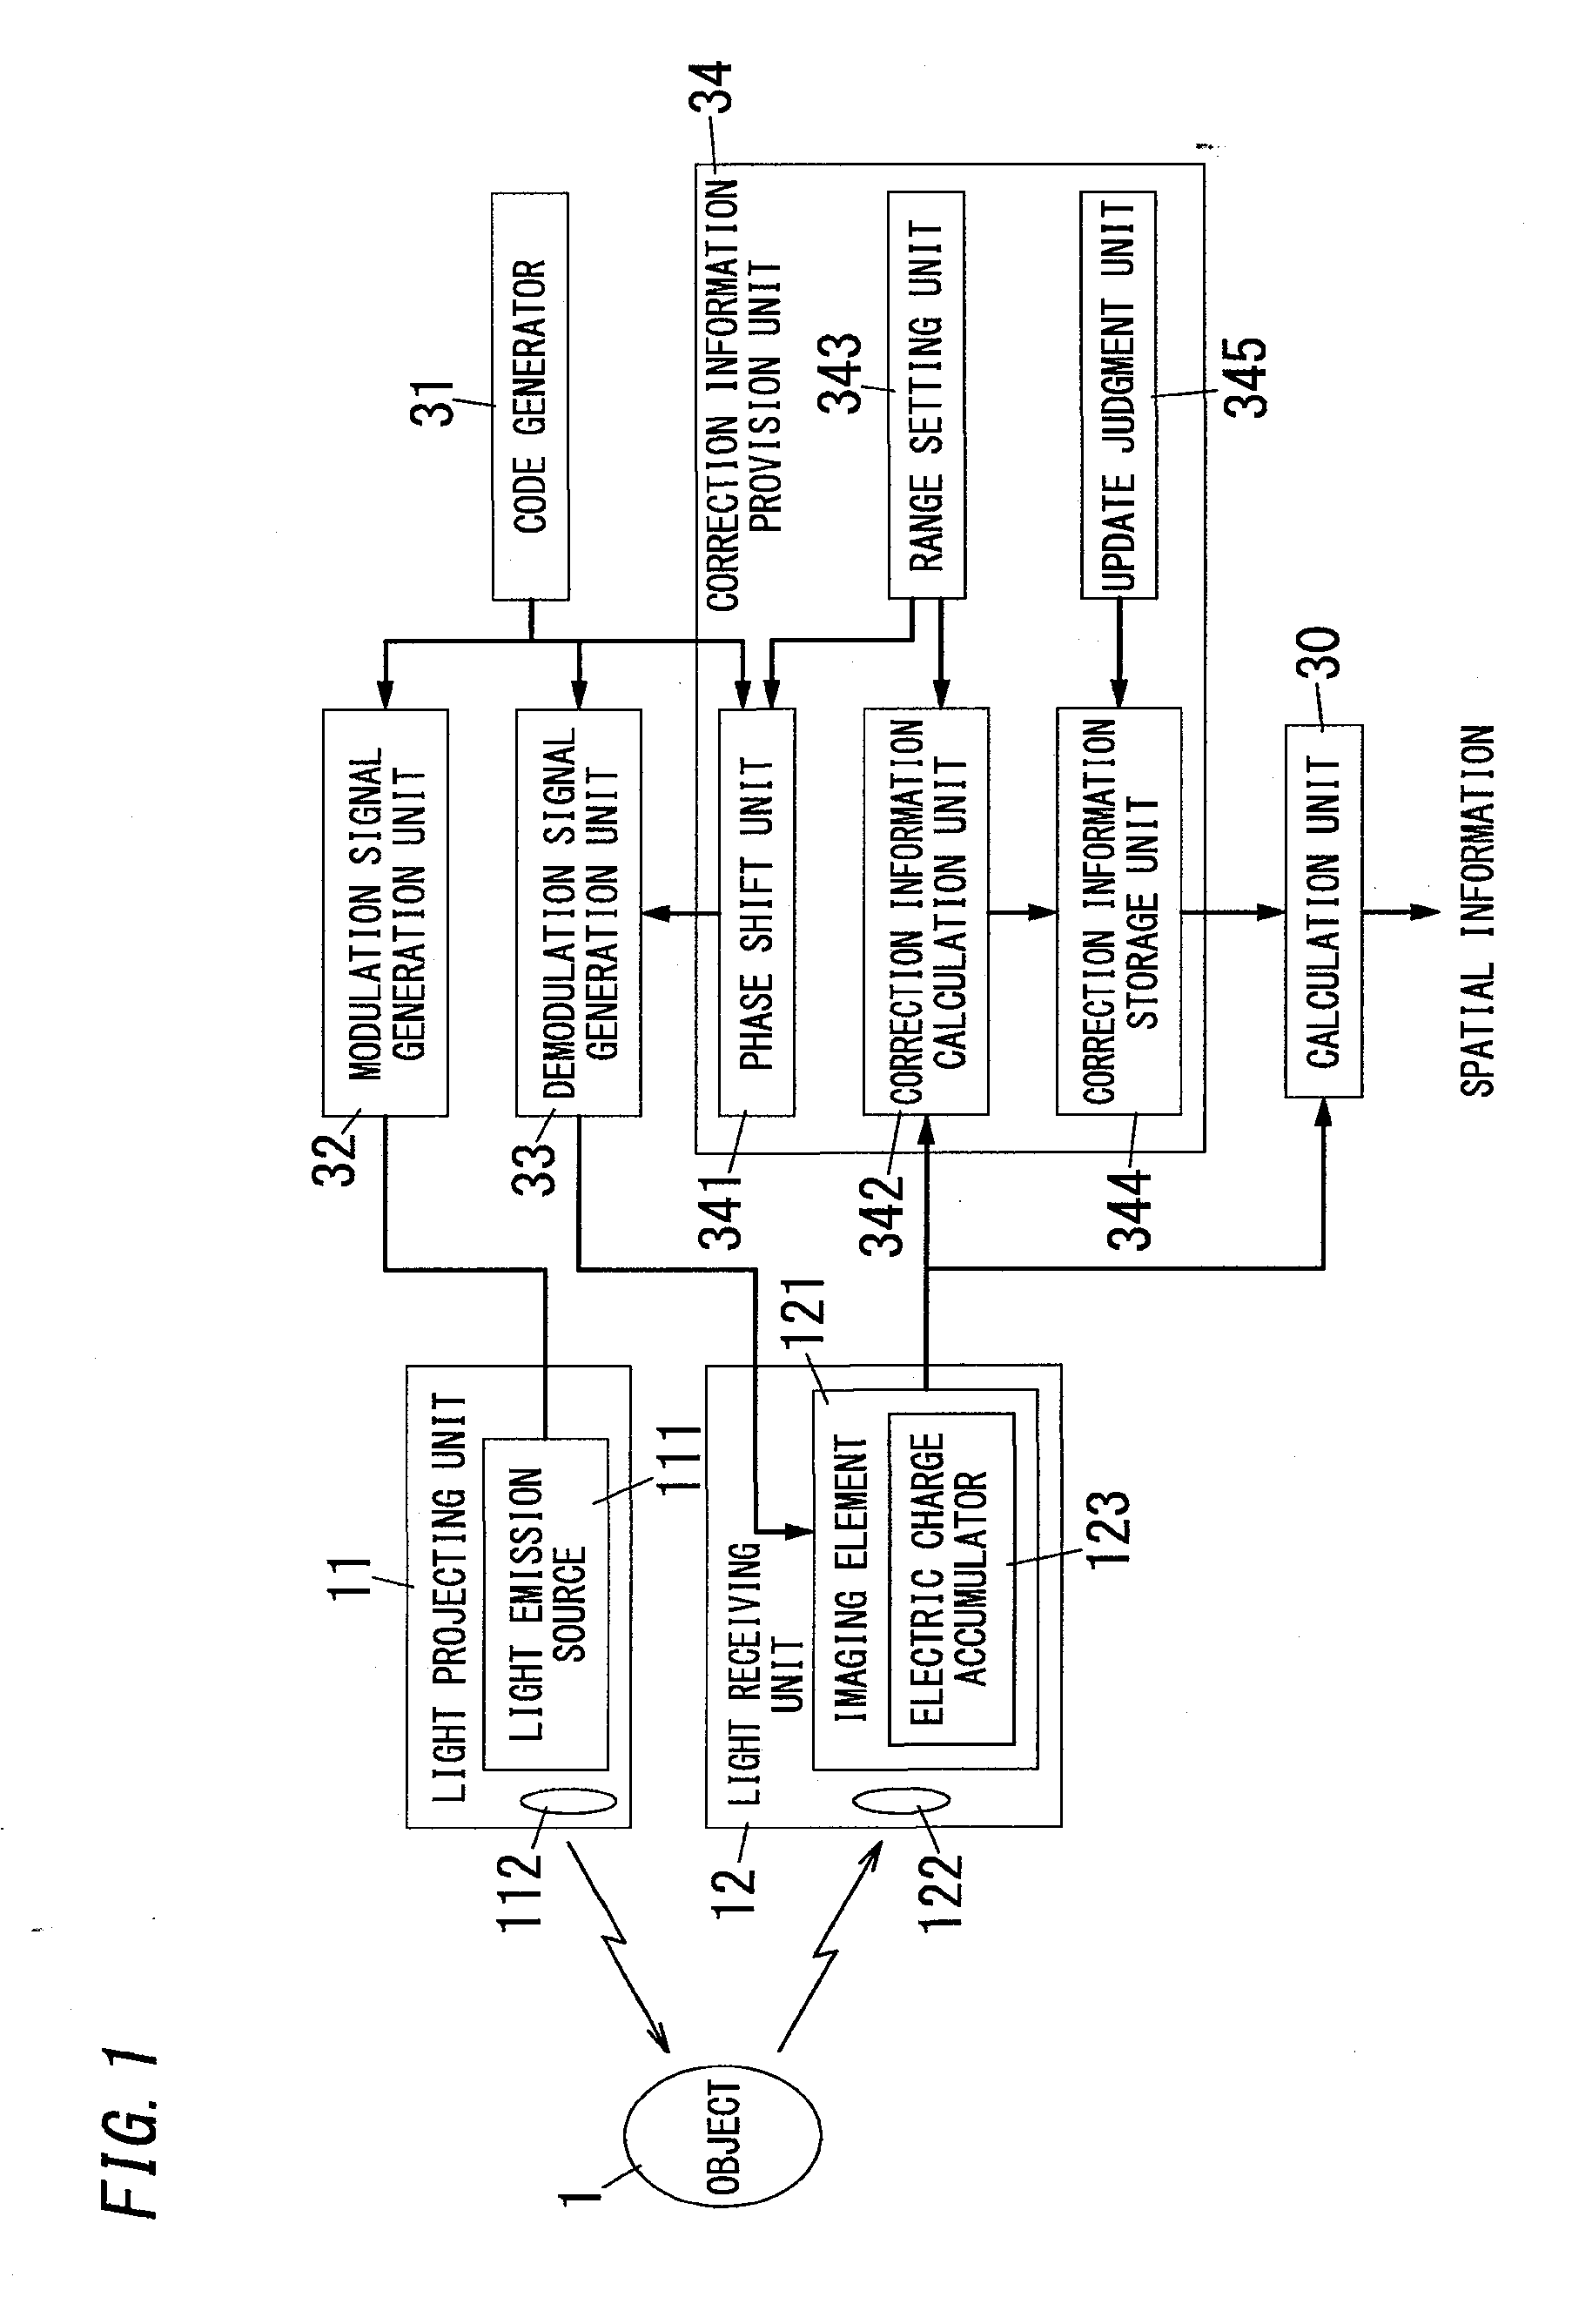 Spatial information detection device